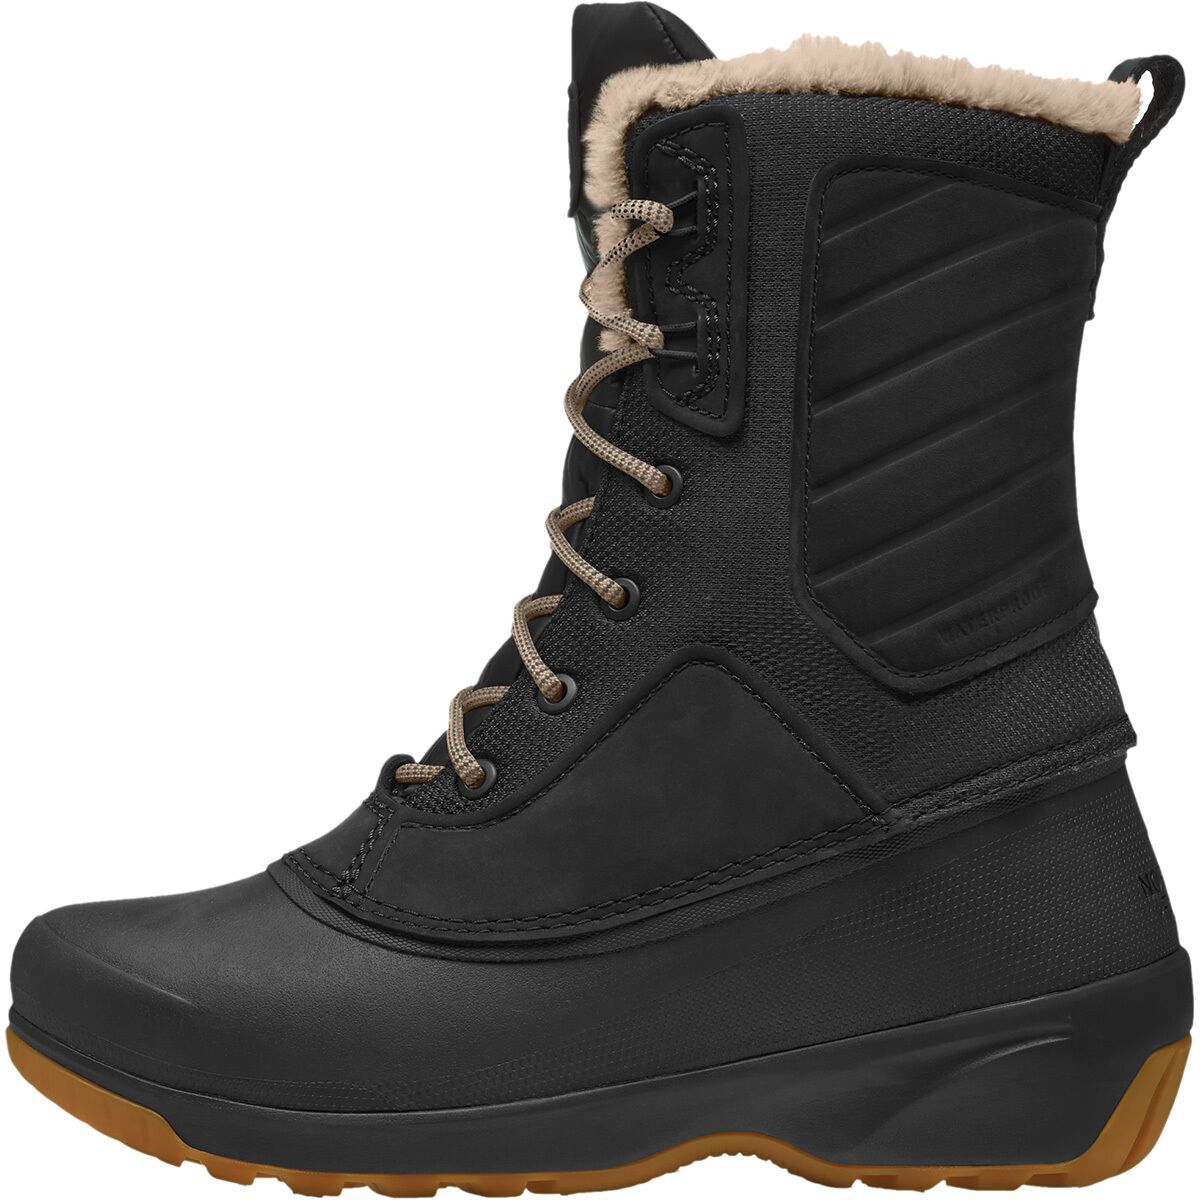 The North Face Shellista IV Mid Waterproof Boot - Women's